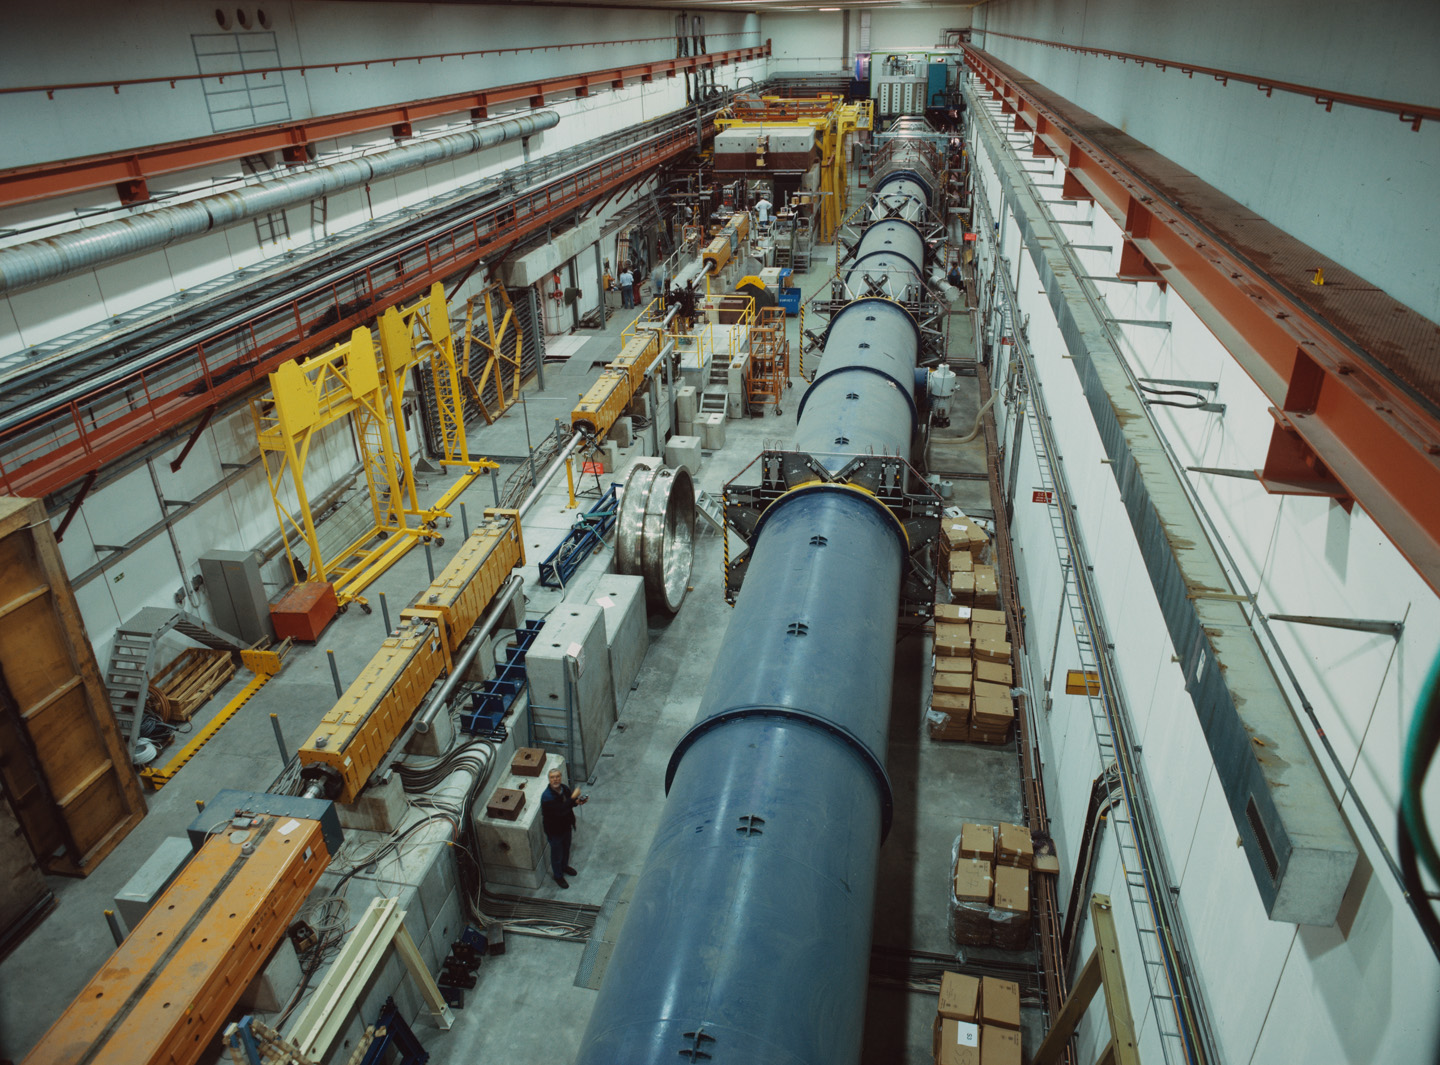 View of the NA48 experiment which has performed important measurements on the asymmetry between matter and antimatter. (Image: CERN)